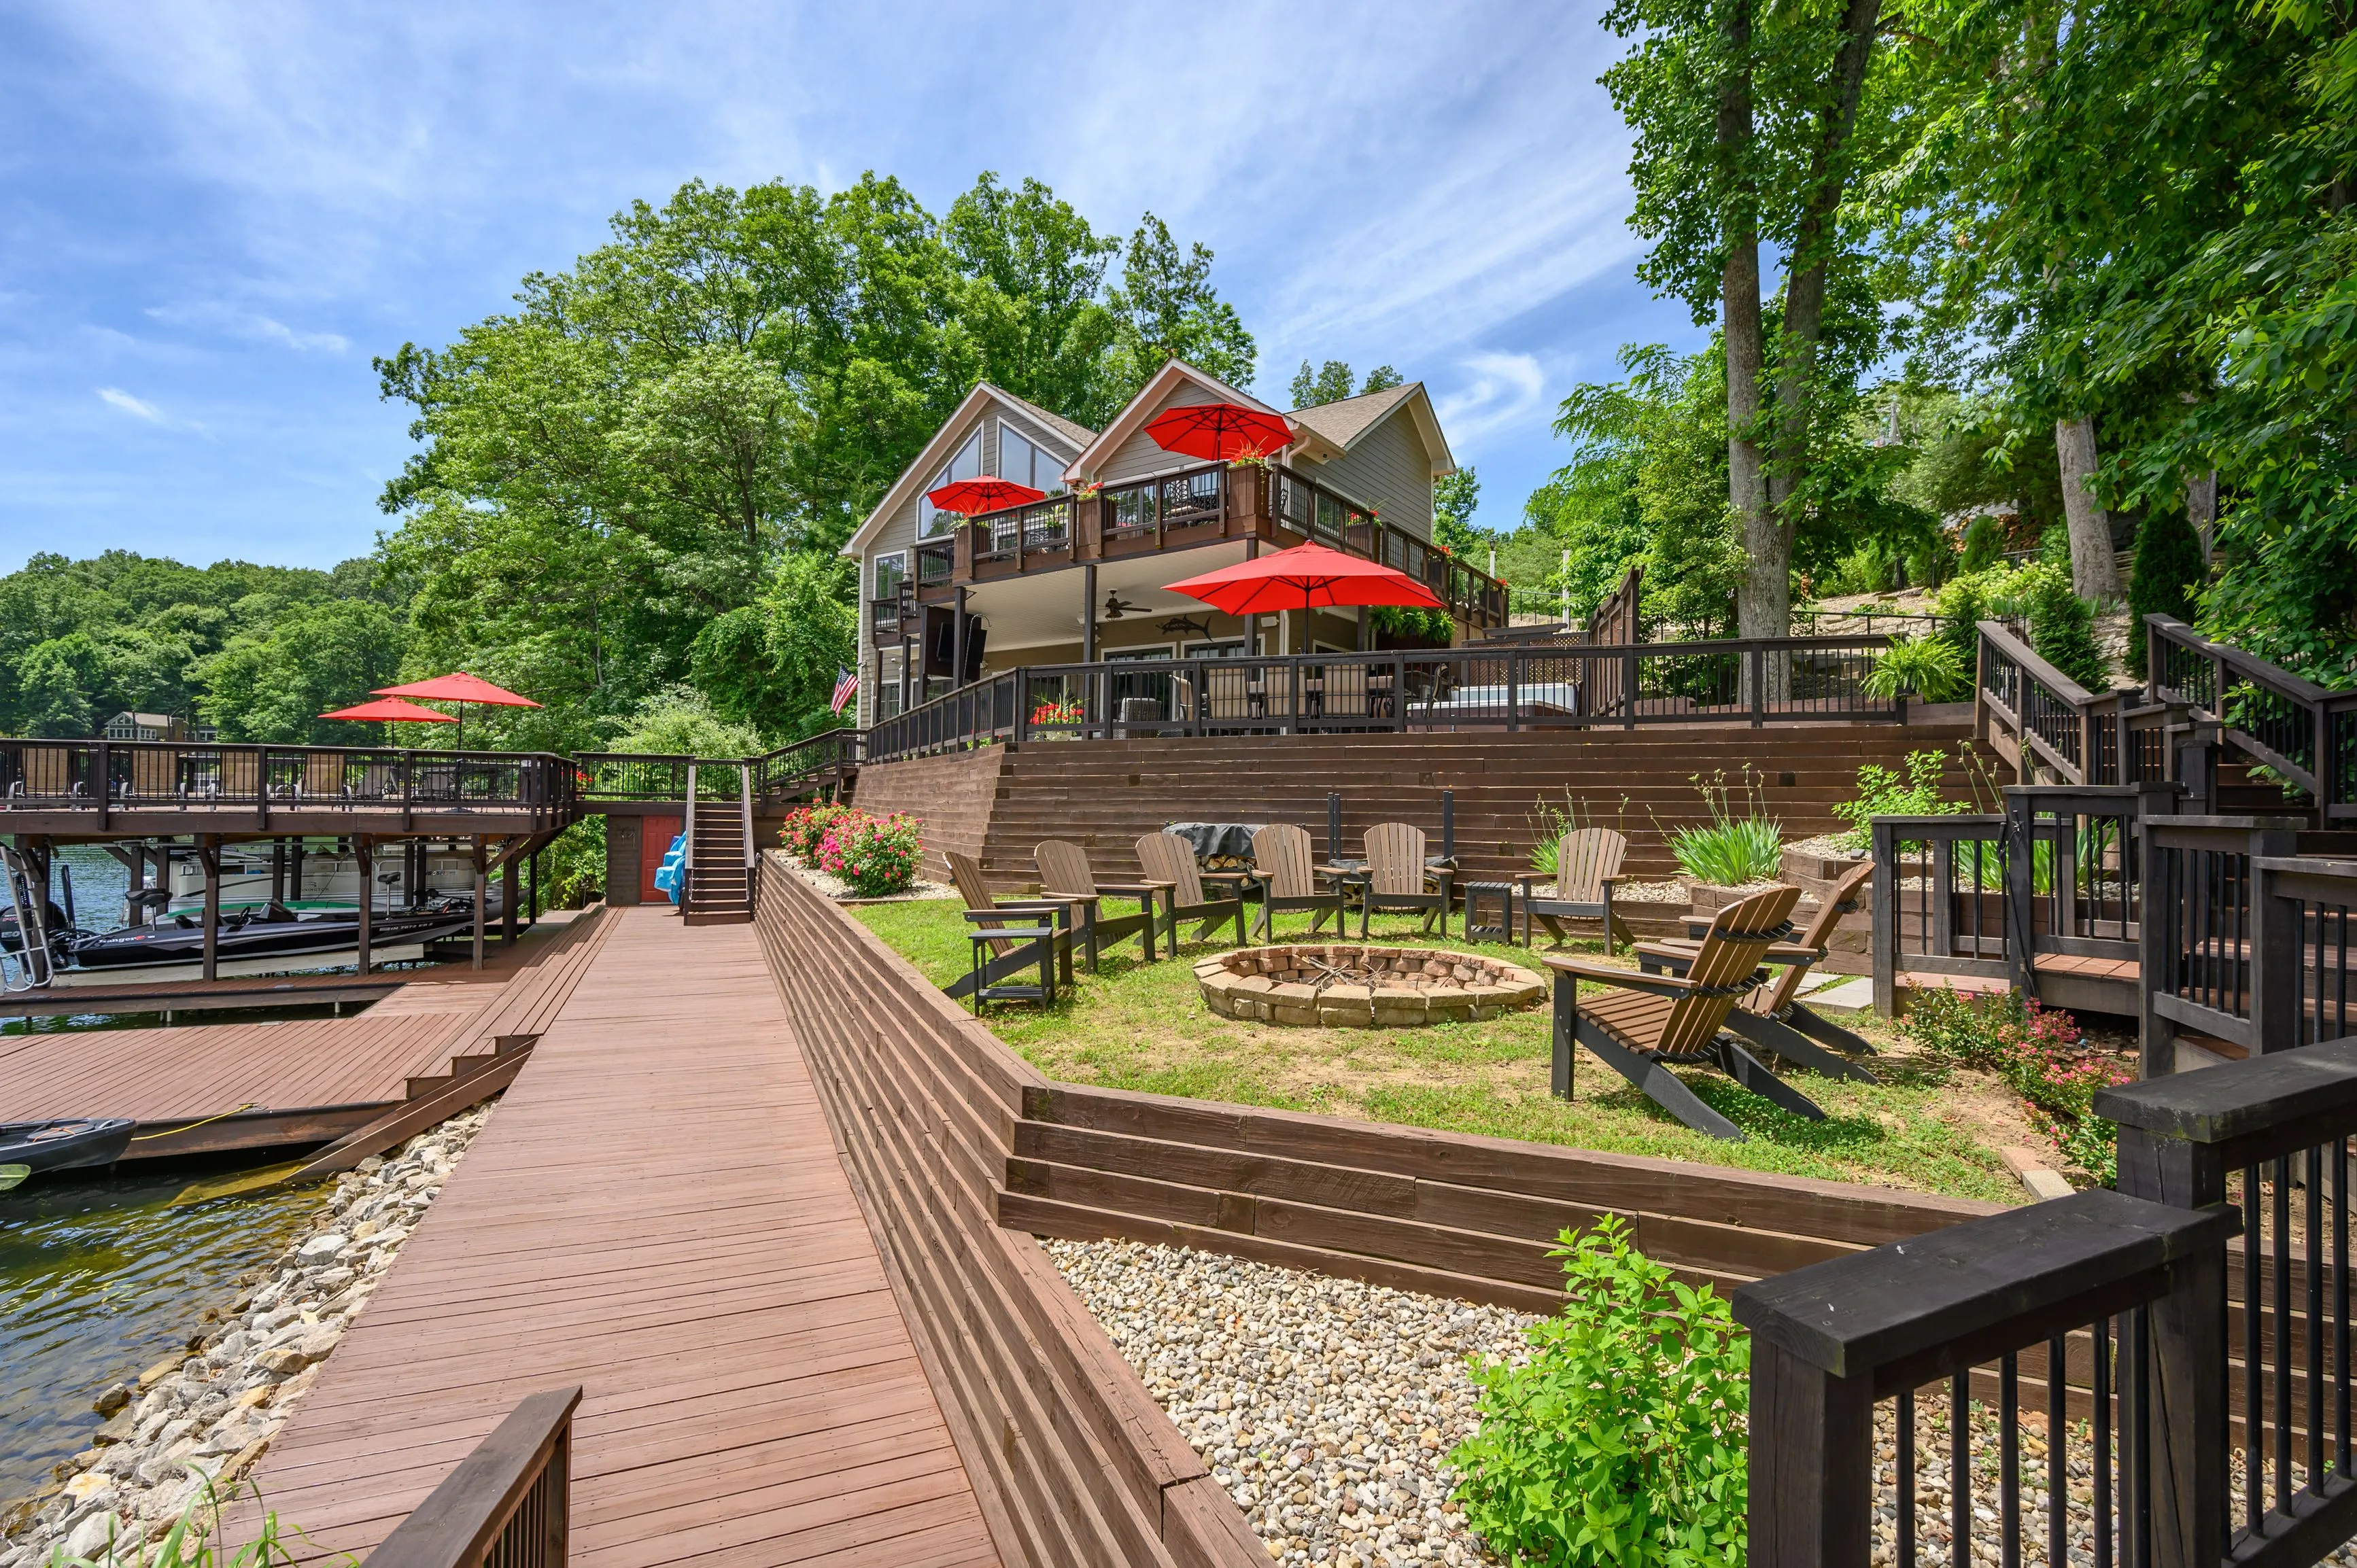 Lakeside house with multiple decks and red umbrellas surrounded by trees with a wooden dock leading up to the property.